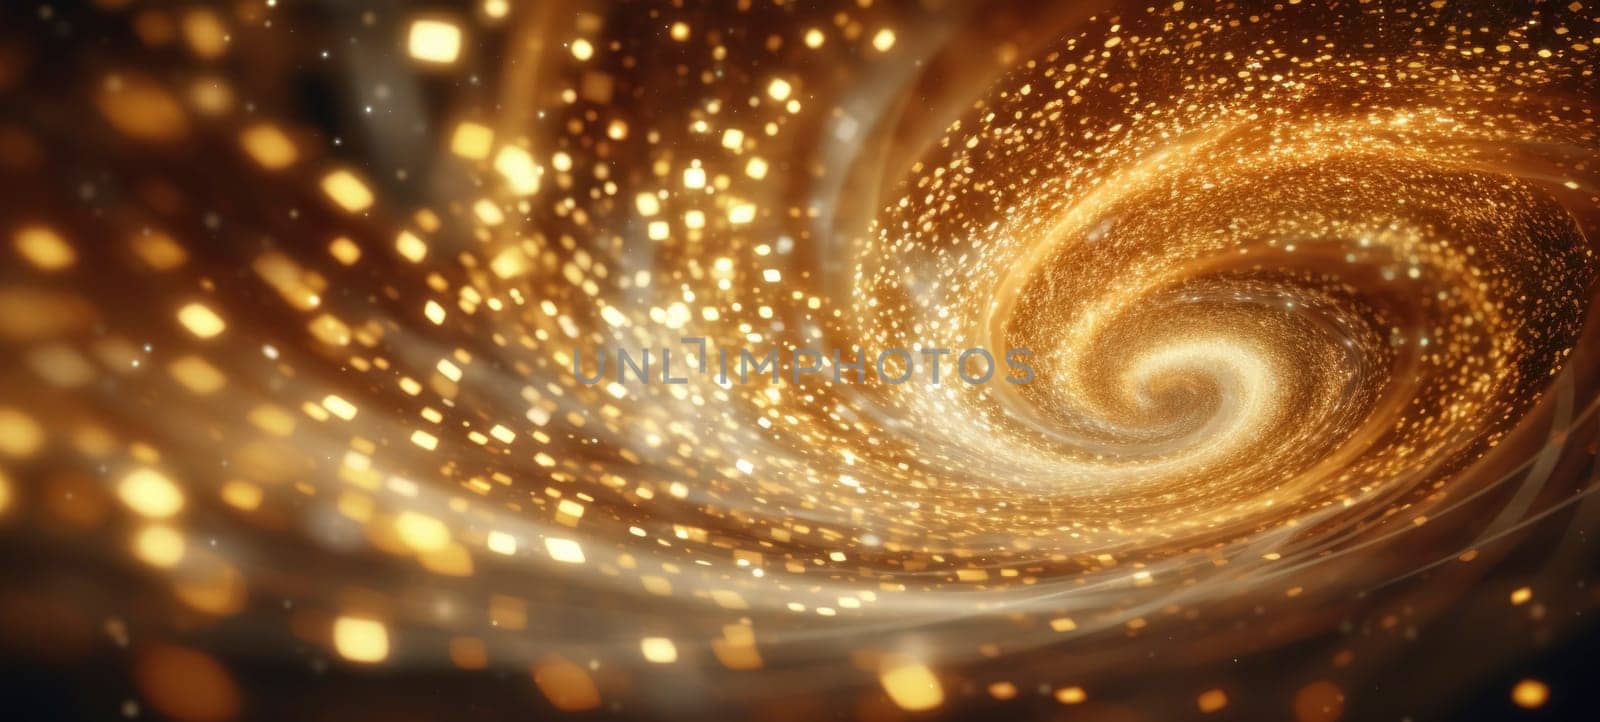 Abstract golden spiral with glittering particles, ideal for technology or luxury themes.